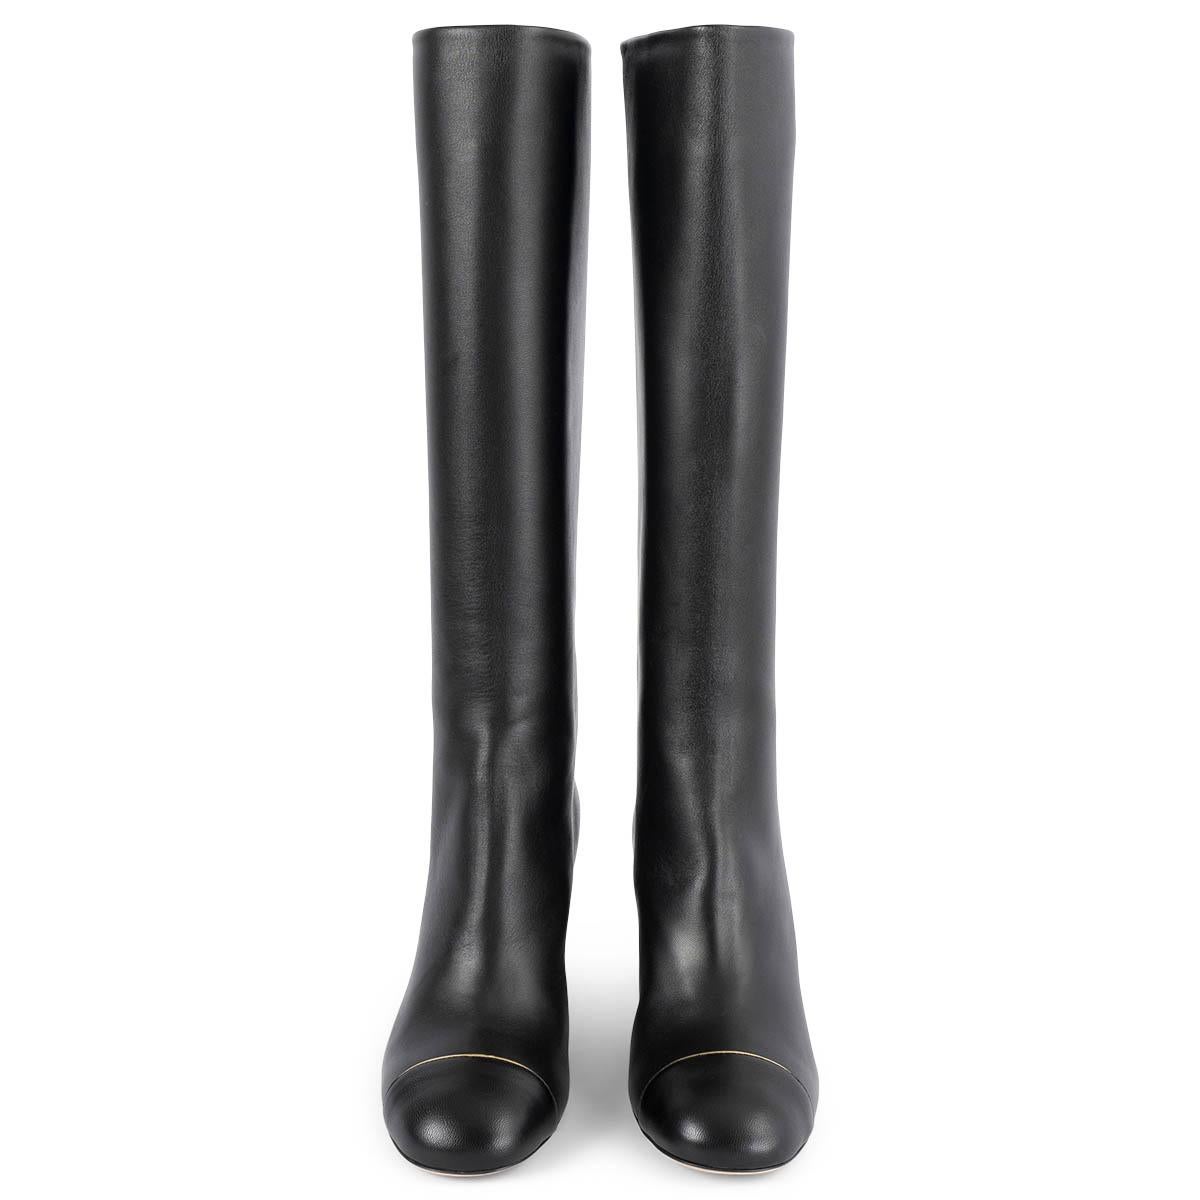 100% authentic Chanel knee-high block-heel boots in smooth black calfskin with gold-tone metal trim on the heel and classic cap toe. Brand new. 

Measurements
Model	G28660
Imprinted Size	38
Shoe Size	38
Inside Sole	25cm (9.8in)
Width	7.5cm